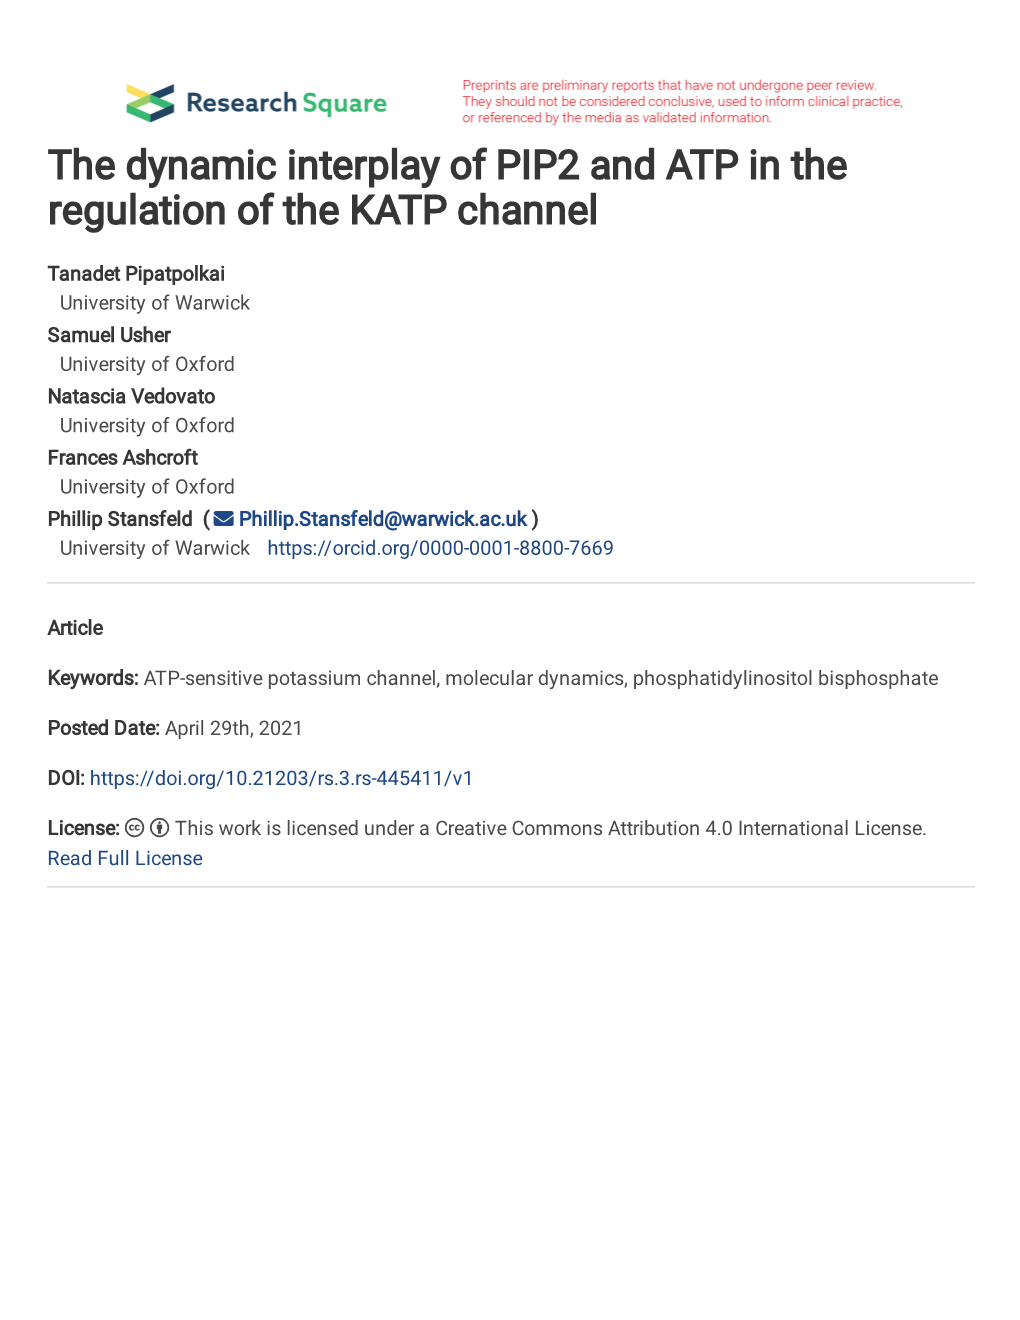 The Dynamic Interplay of PIP2 and ATP in the Regulation of the KATP Channel